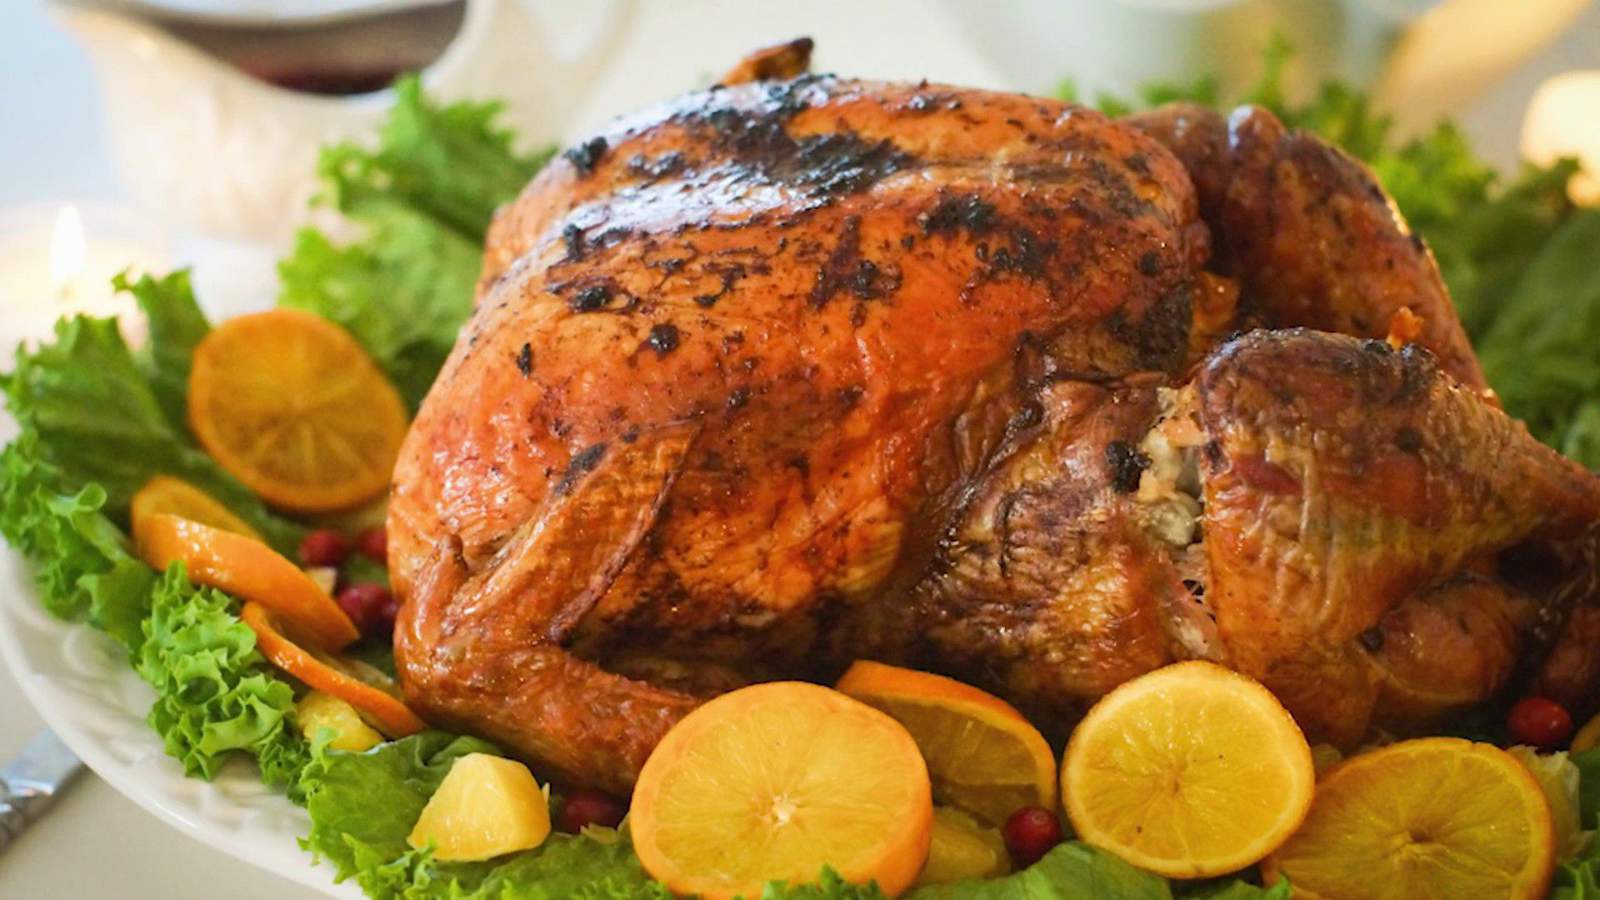 Don’t feel like cooking? Here’s where to order a Thanksgiving meal in San Antonio